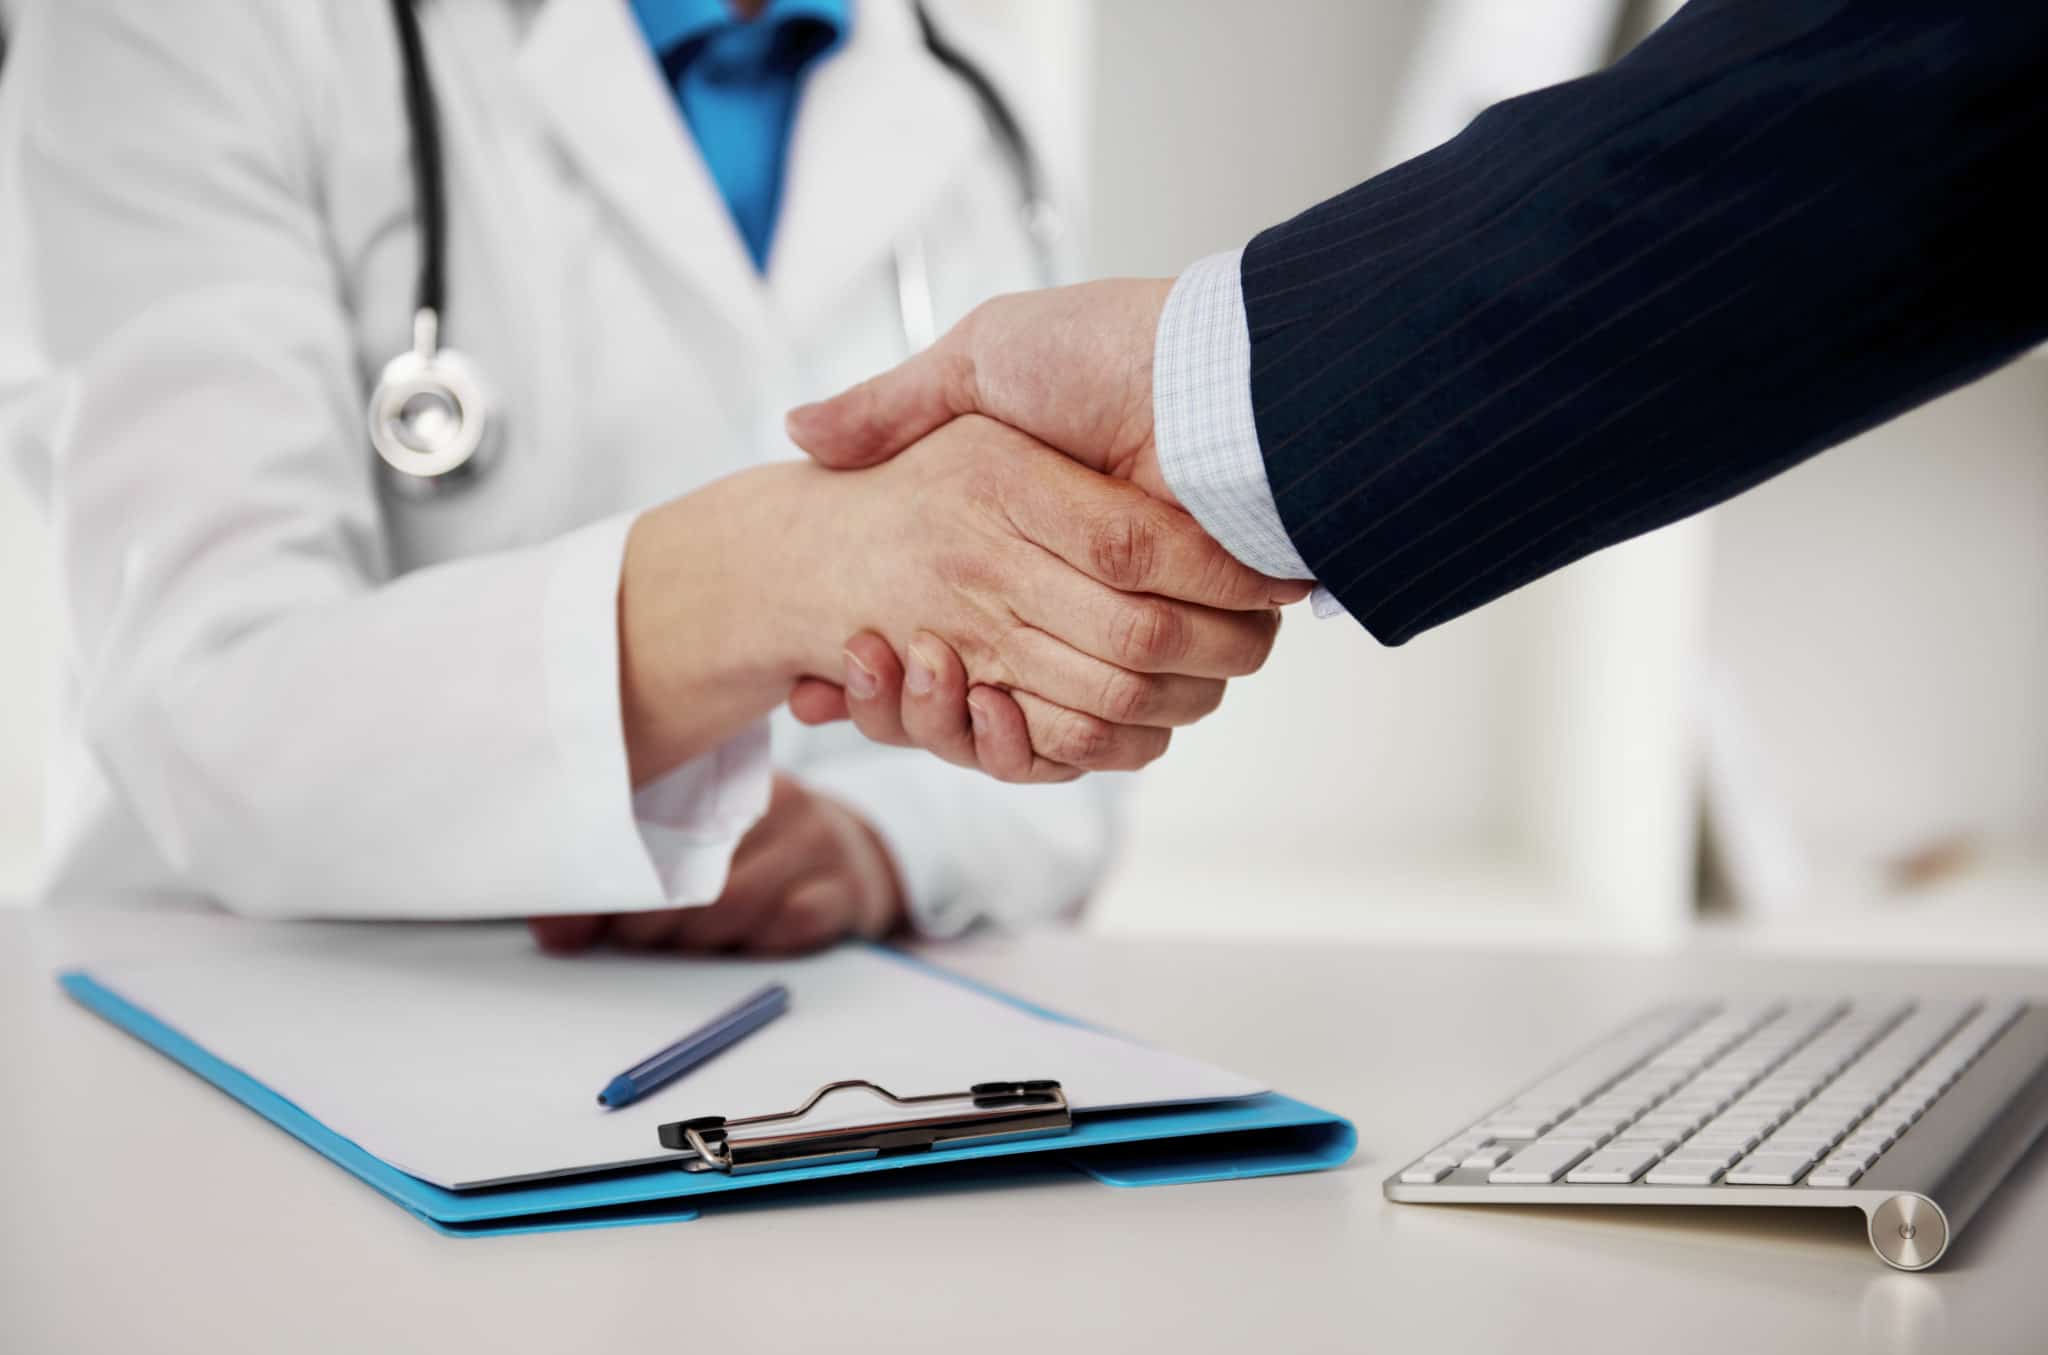 Female Doctor In Uniform Shaking Hands With Businessman Partner In The Office.